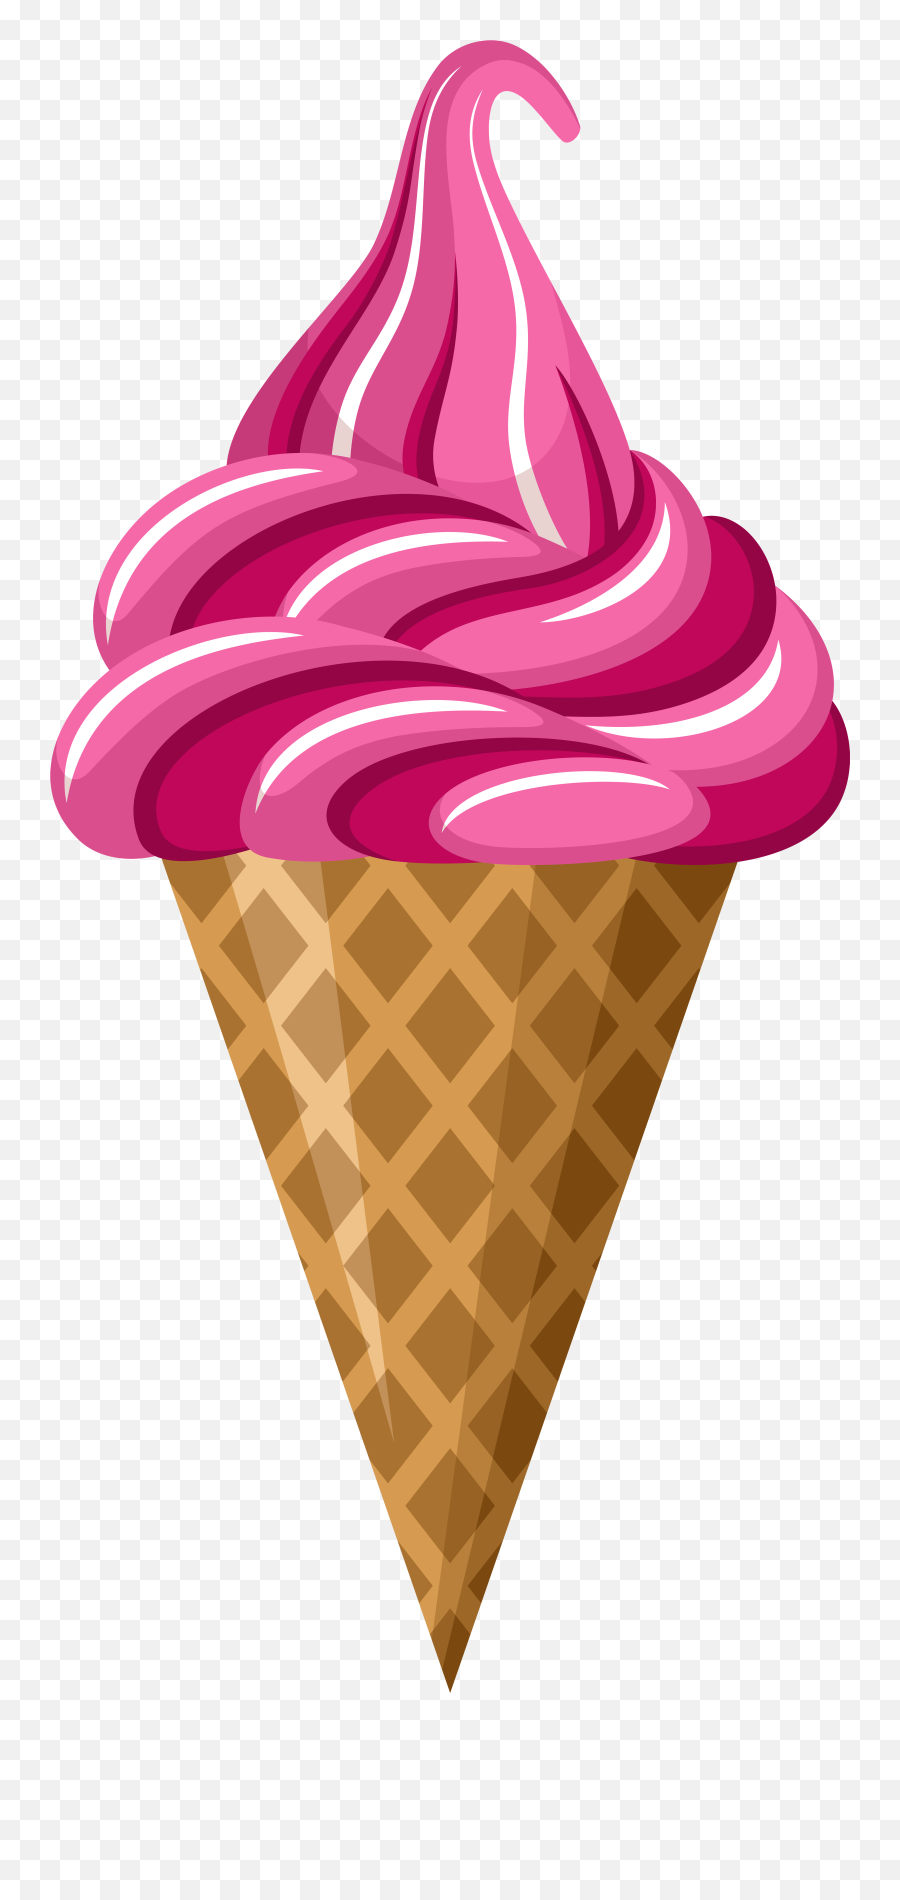 Download Free Png Ice Cream Cone Strawberry Clip - Clipart Ice Cream Cone,Ice Cream Transparent Background